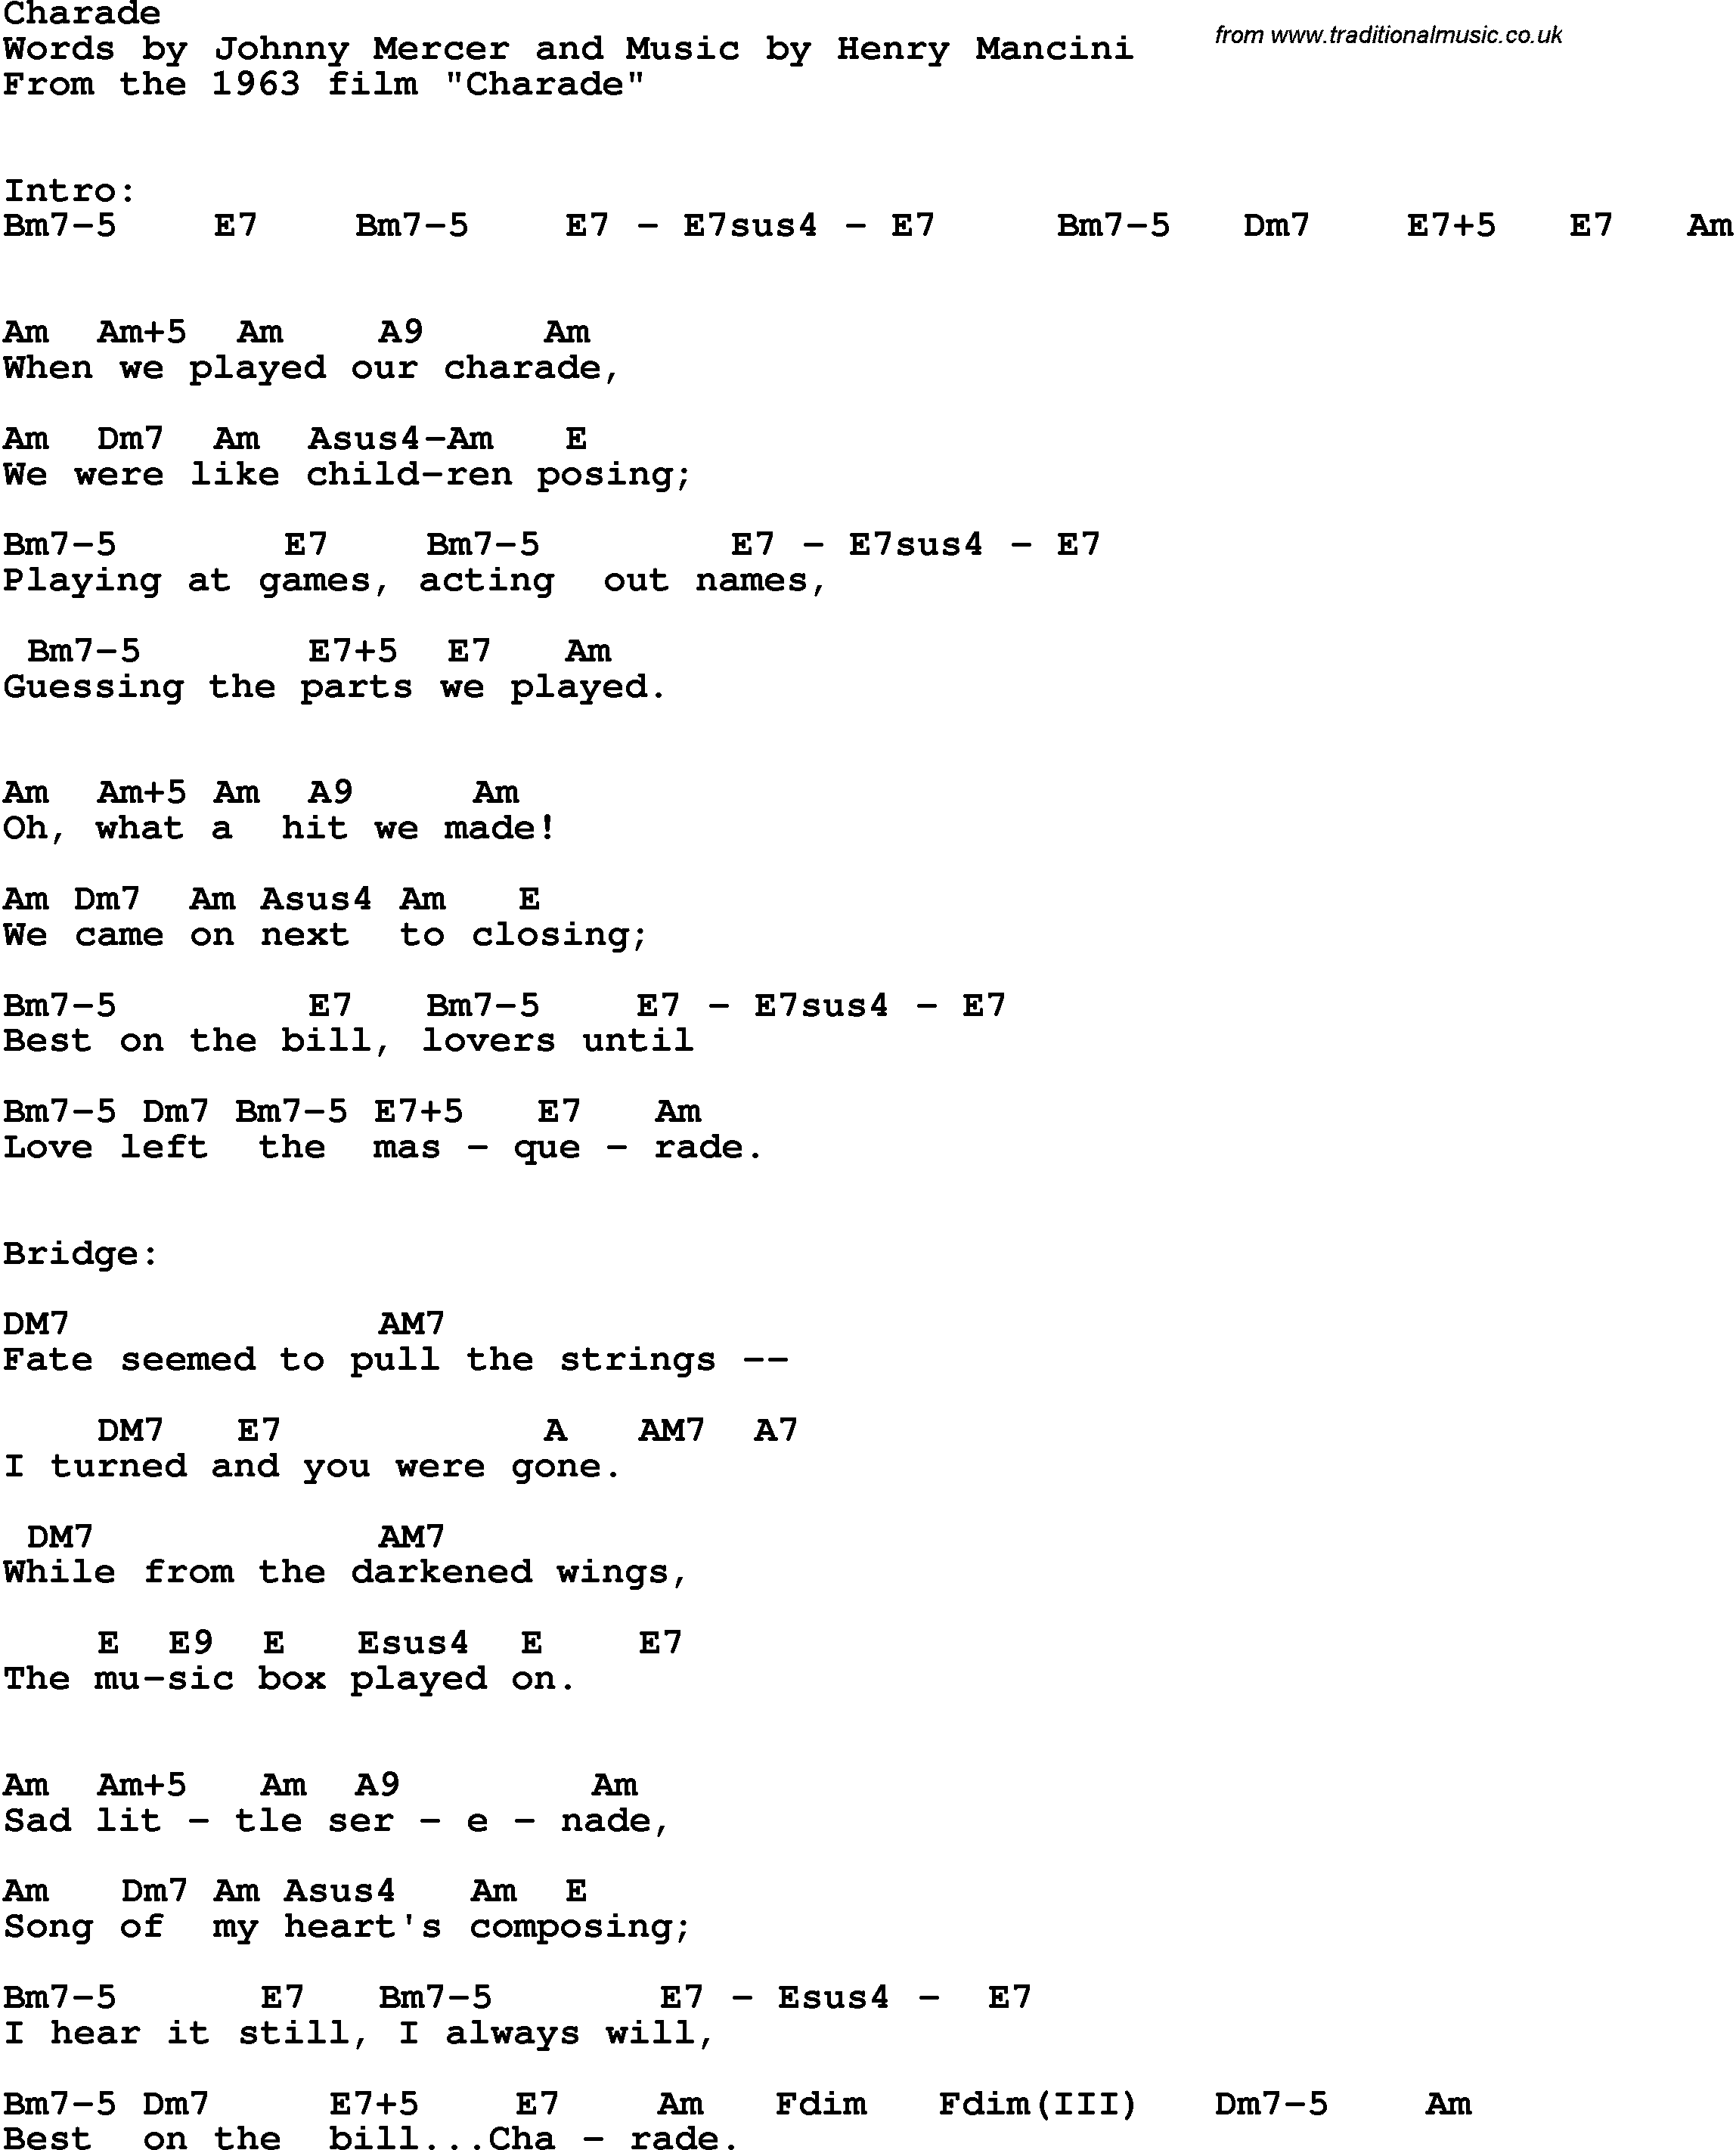 Song Lyrics with guitar chords for Charade - Henry Mancini, 1963